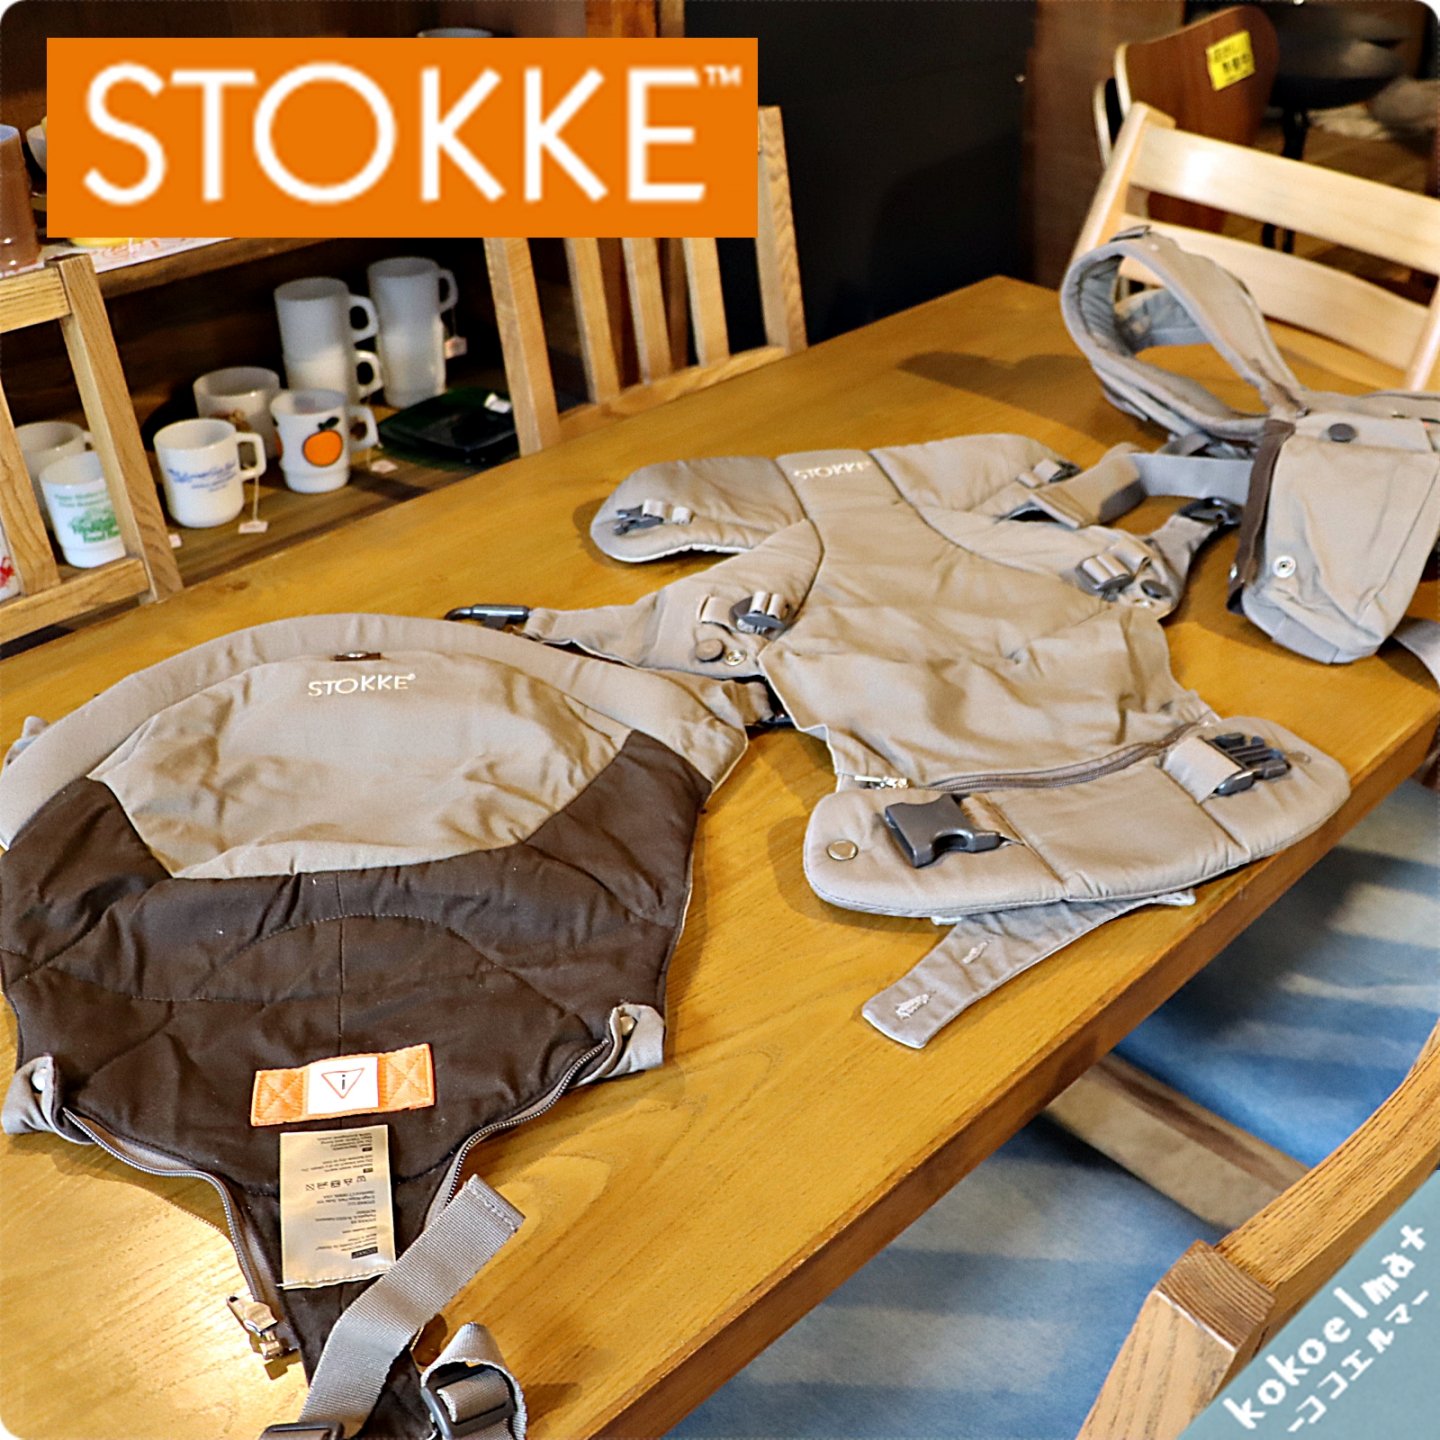 STOKKE◇ストッケ◇マイキャリア◇The 3 in 1 baby carrier◇抱っこ